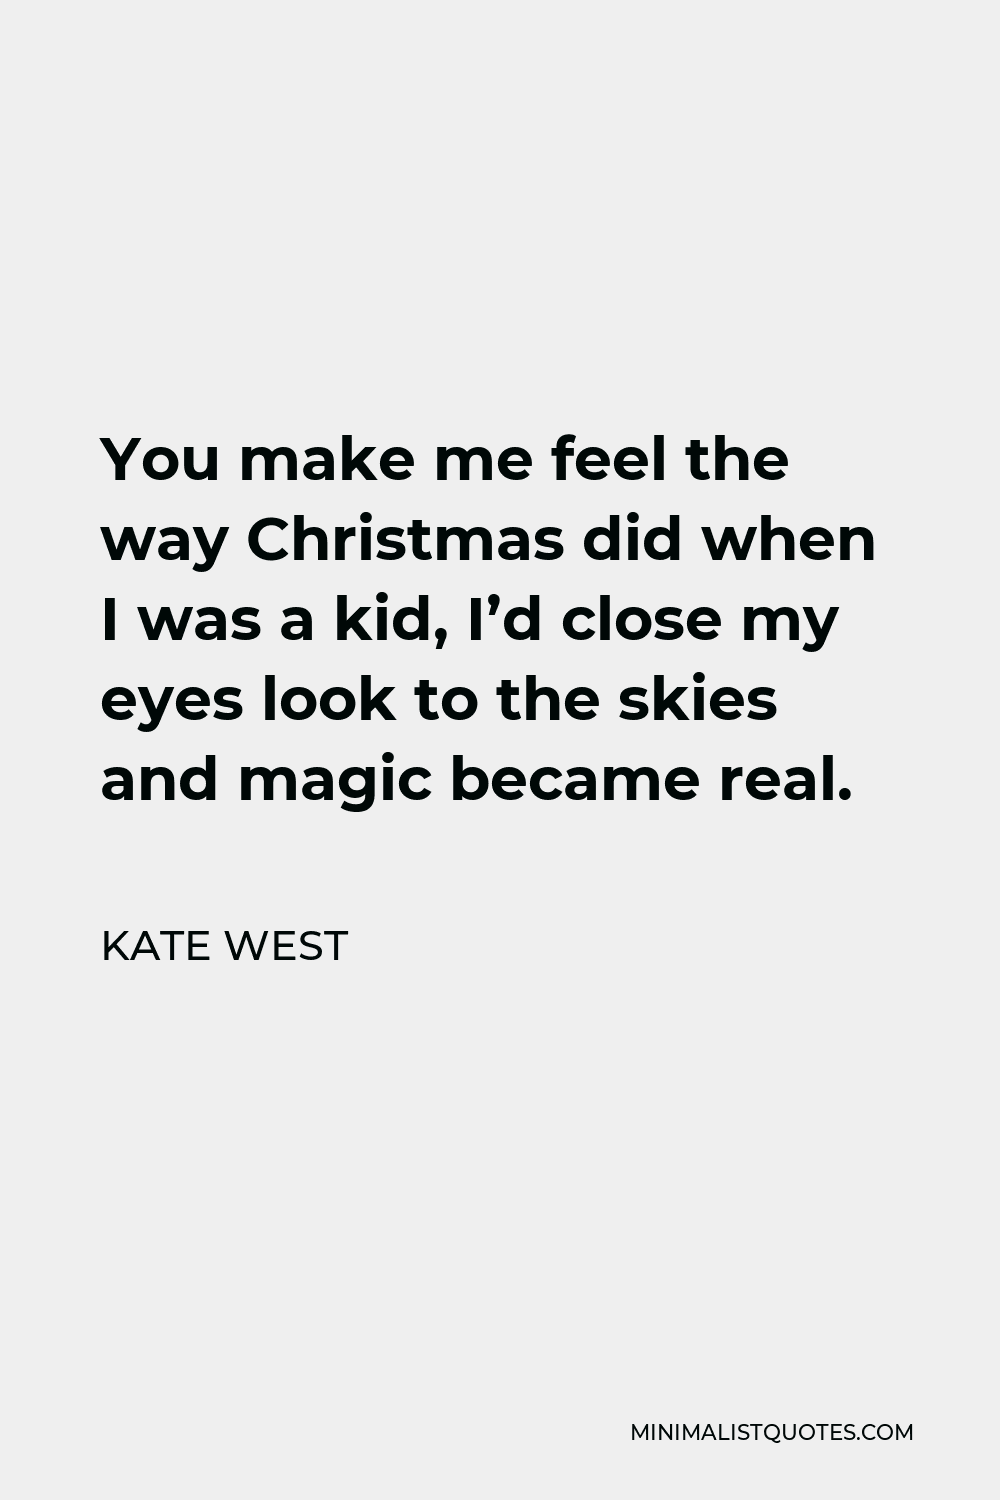 Kate West Quote - You make me feel the way Christmas did when I was a kid, I’d close my eyes look to the skies and magic became real.